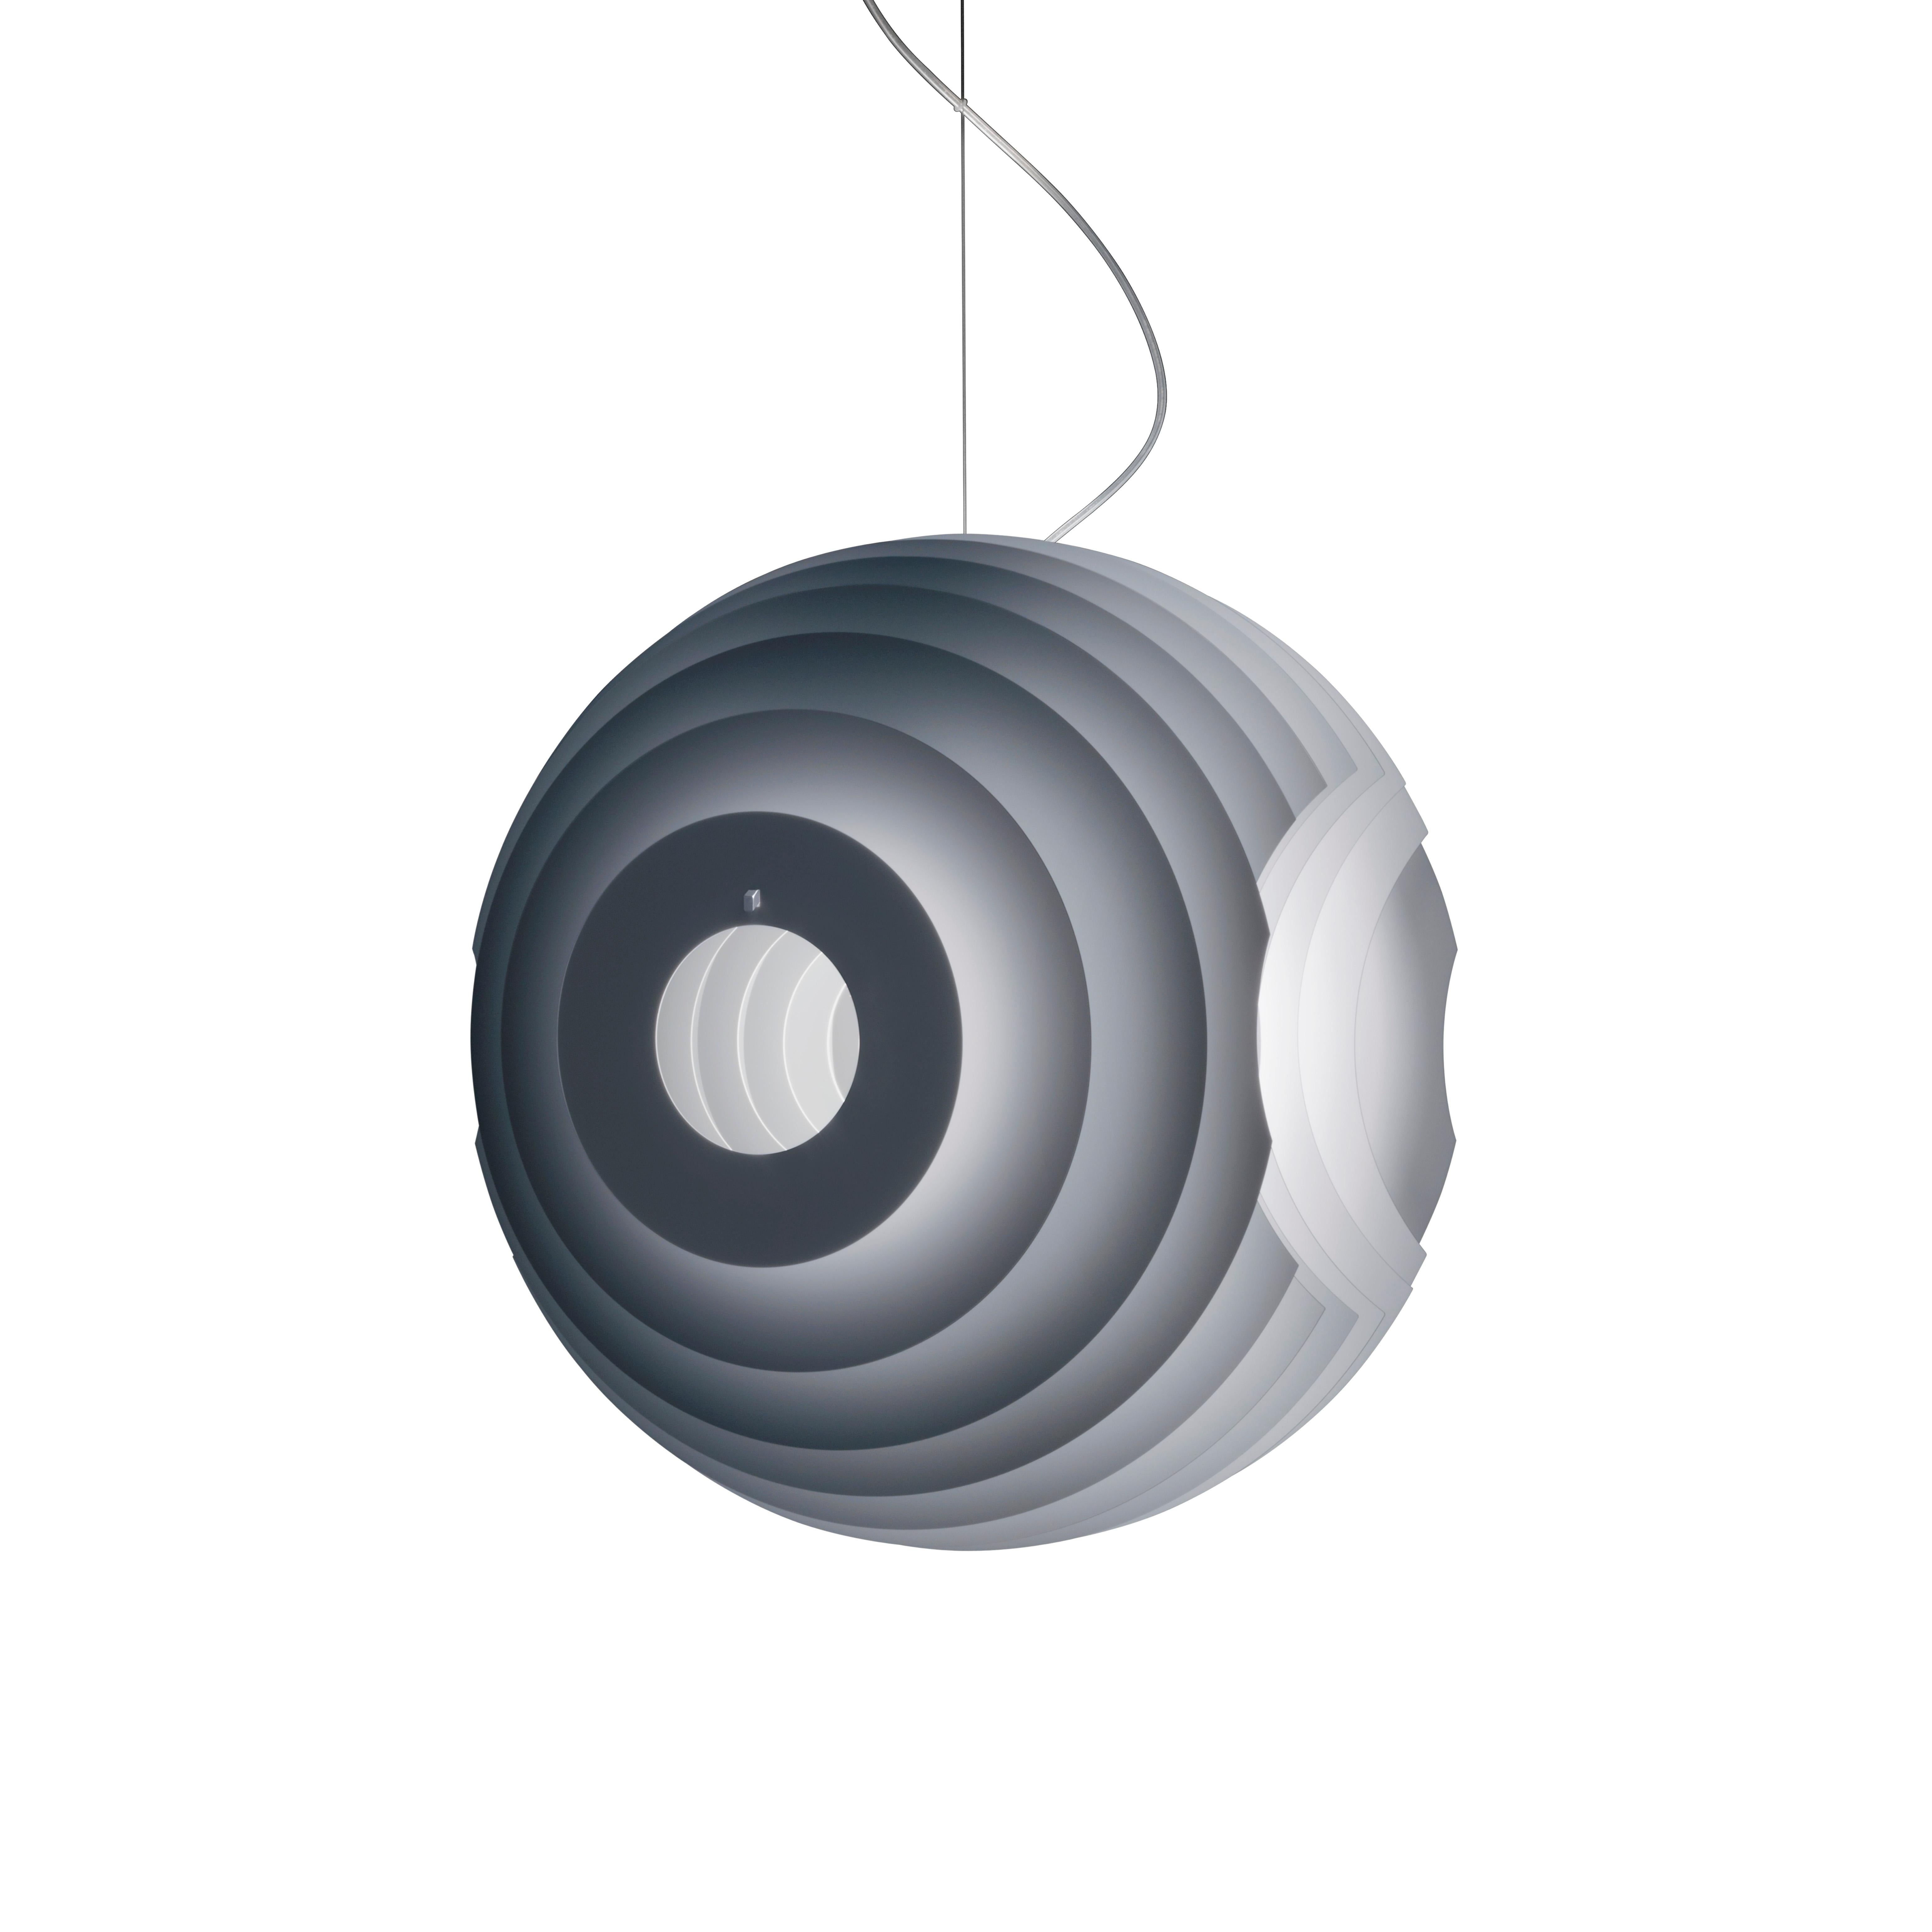 A volume created by two-dimensional surfaces, a chiaroscuro of shadows with a luminous core in the middle: the Supernova lamp is a fascinating paradox. The special design of the metal discs used to make it creates a charming effect of reflected